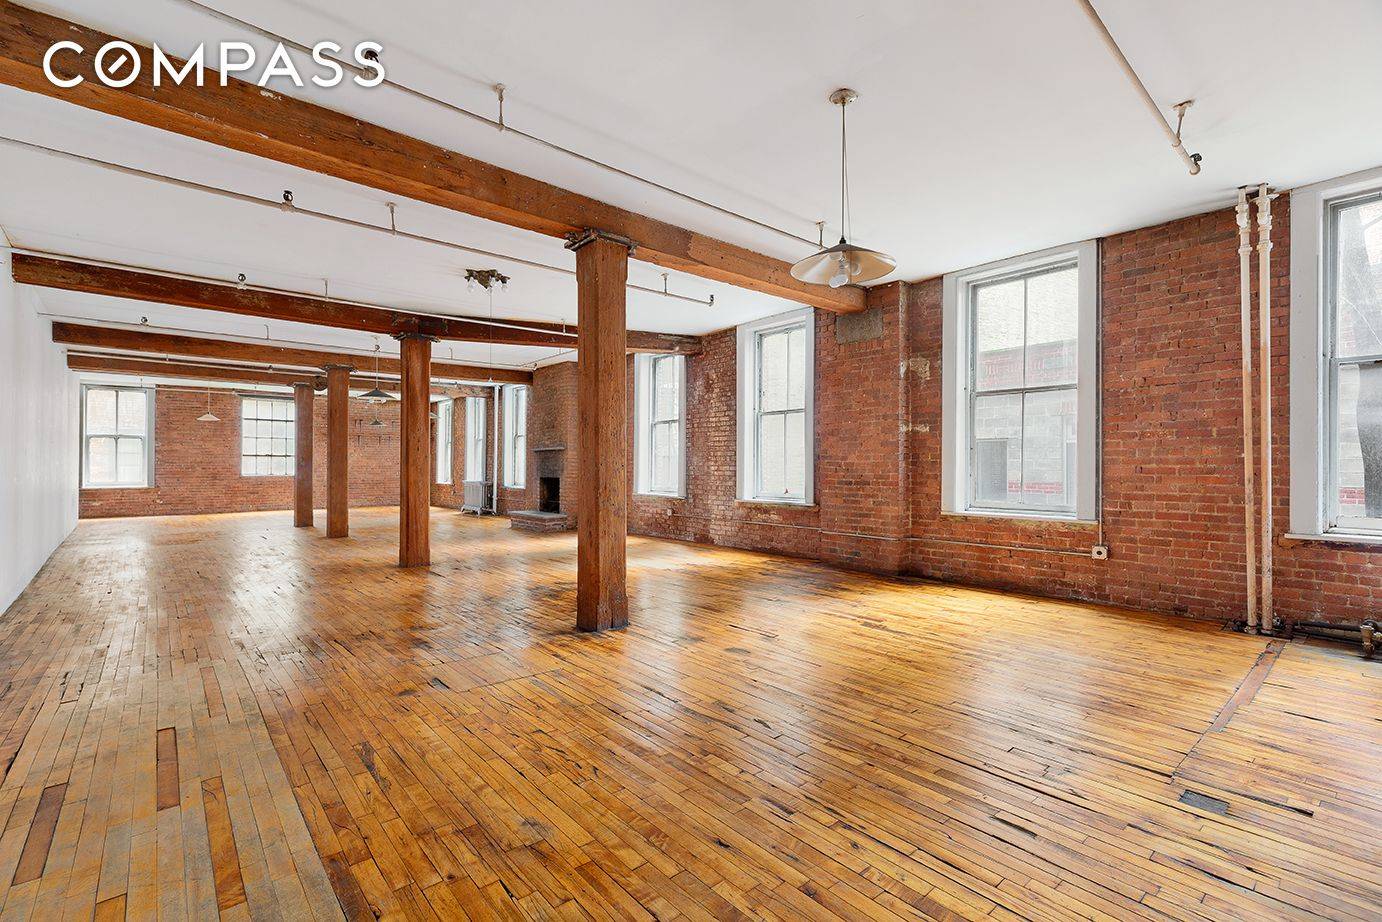 Bring your architect and transform nearly 2, 000 square feet of raw loft space into your 'dream home'.